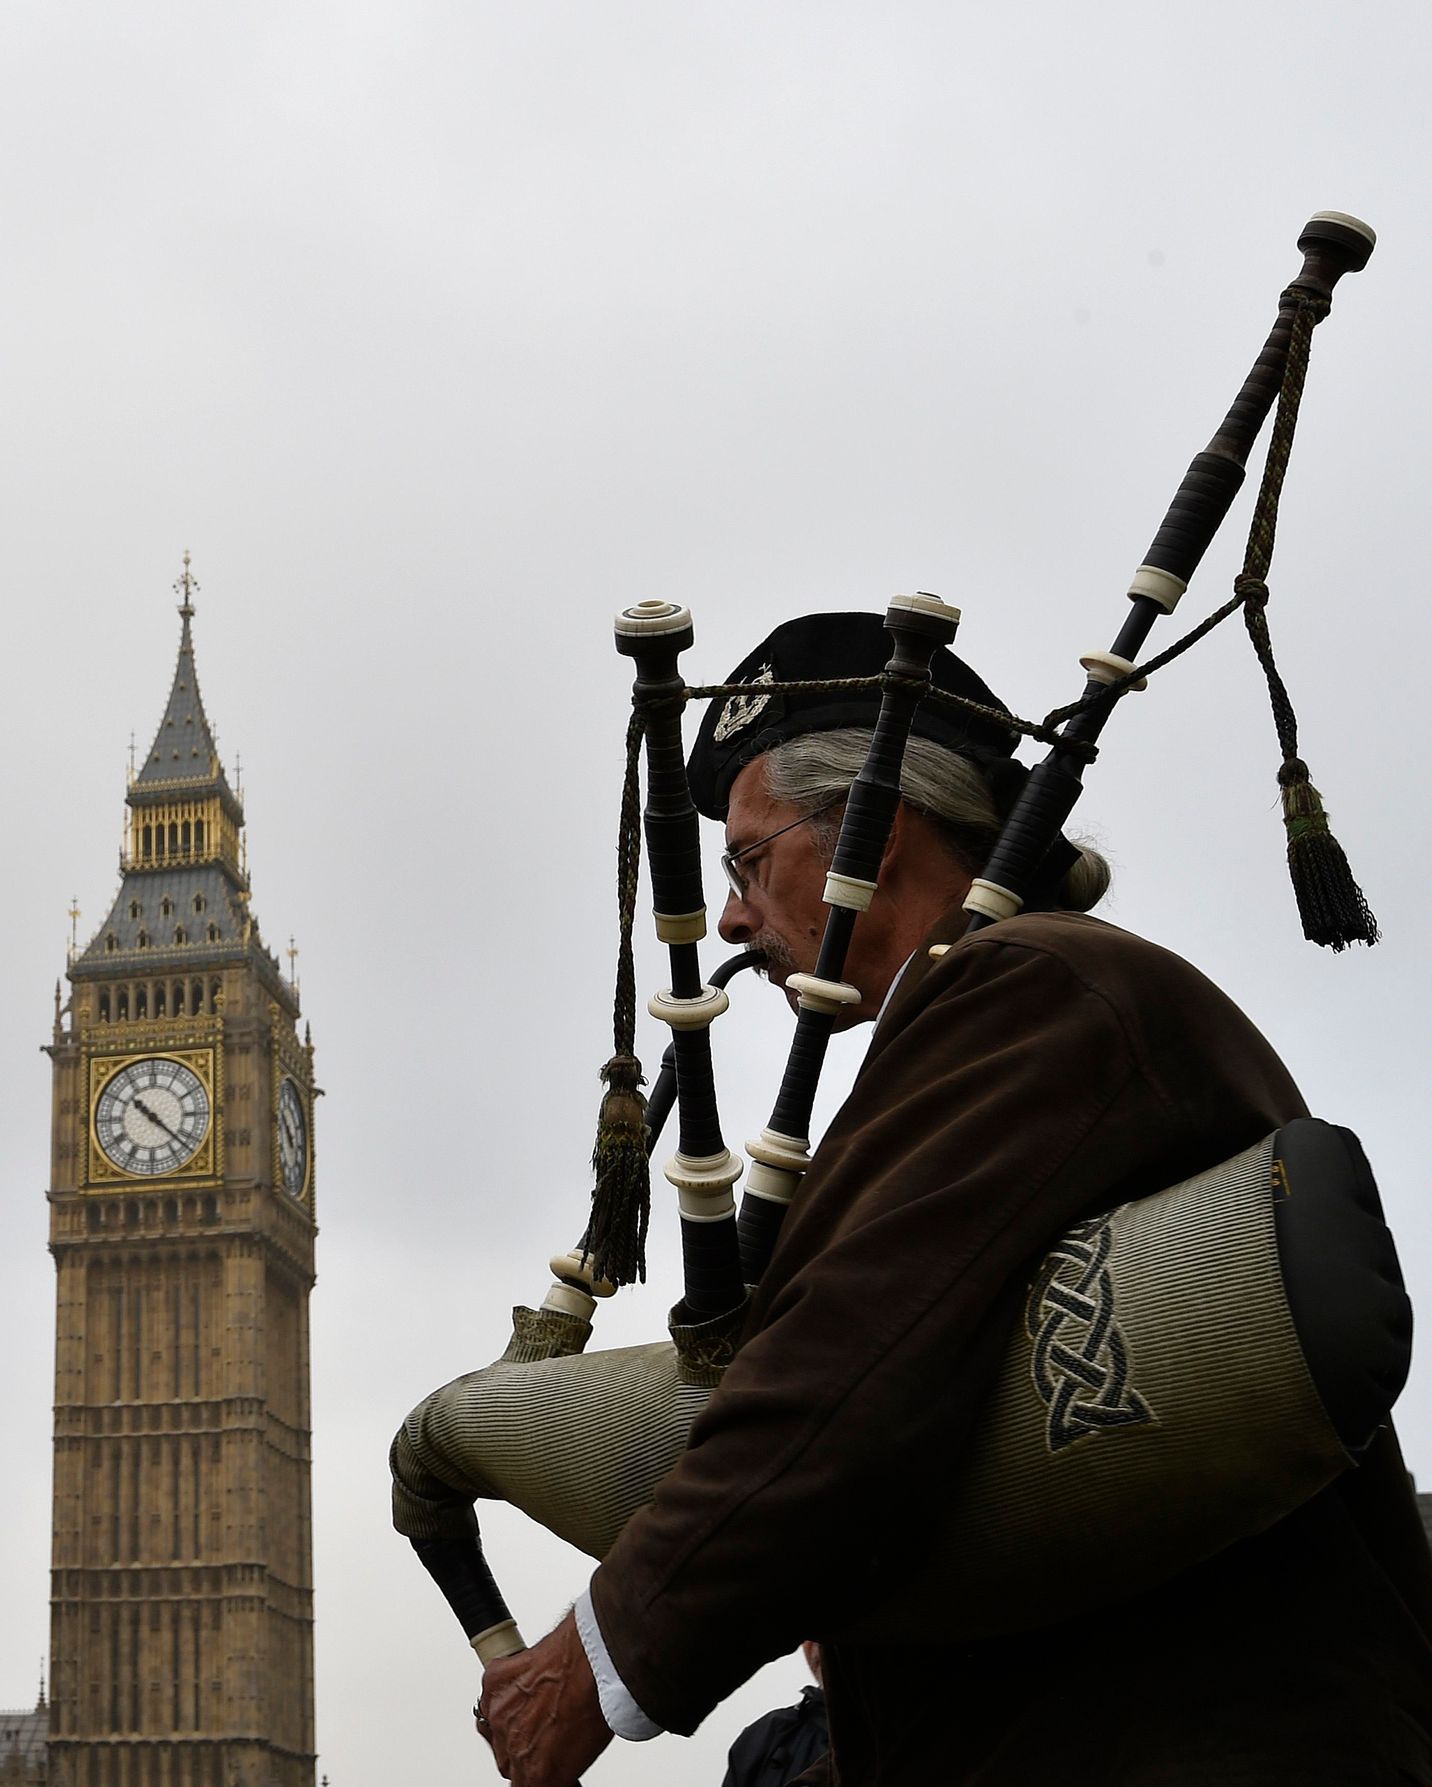 A street performer plays the Scottish bagpipes dressed in traditional Scottish attire on Westminster Bridge in London